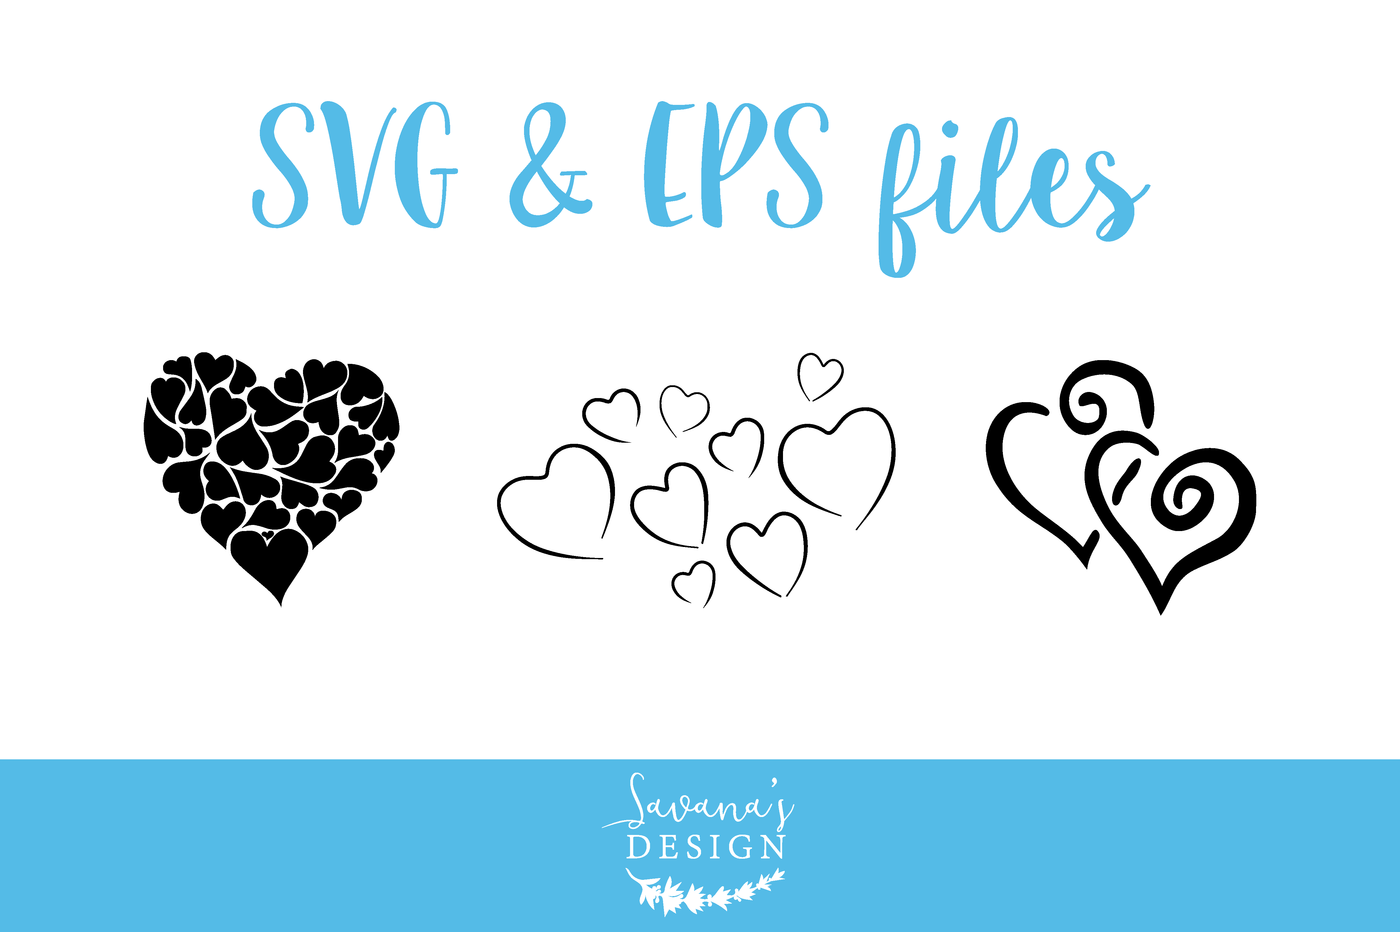 Cutting Svg Files With Cricut Expression 2 - Layered SVG Cut File